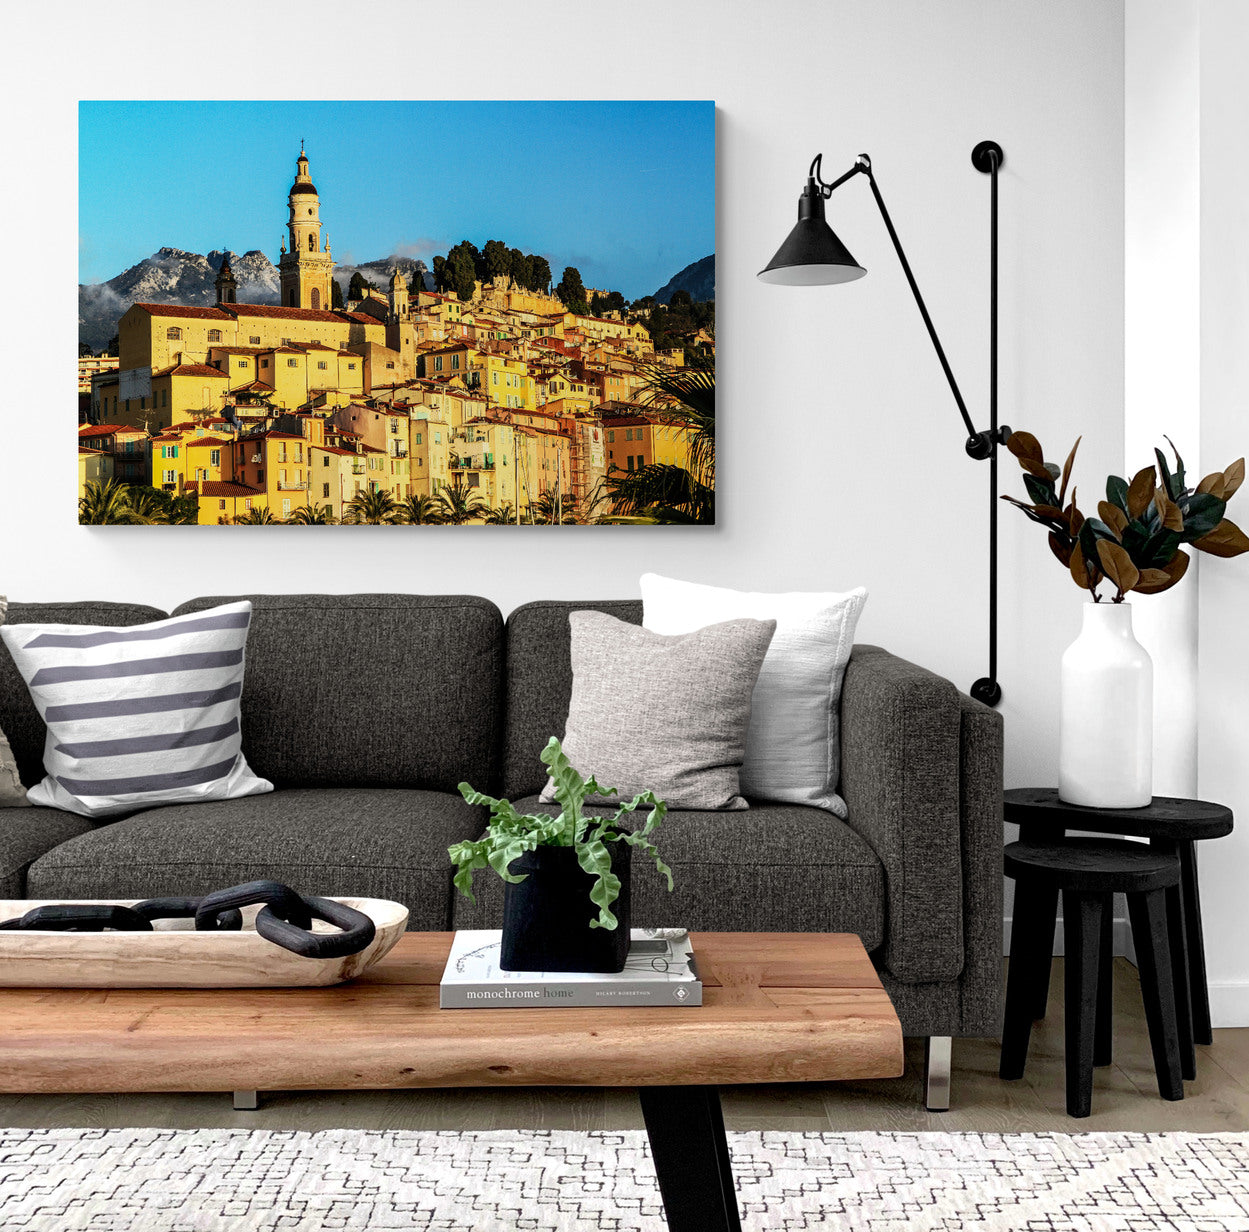 Printed canvas · High quality · South of France · Wall art